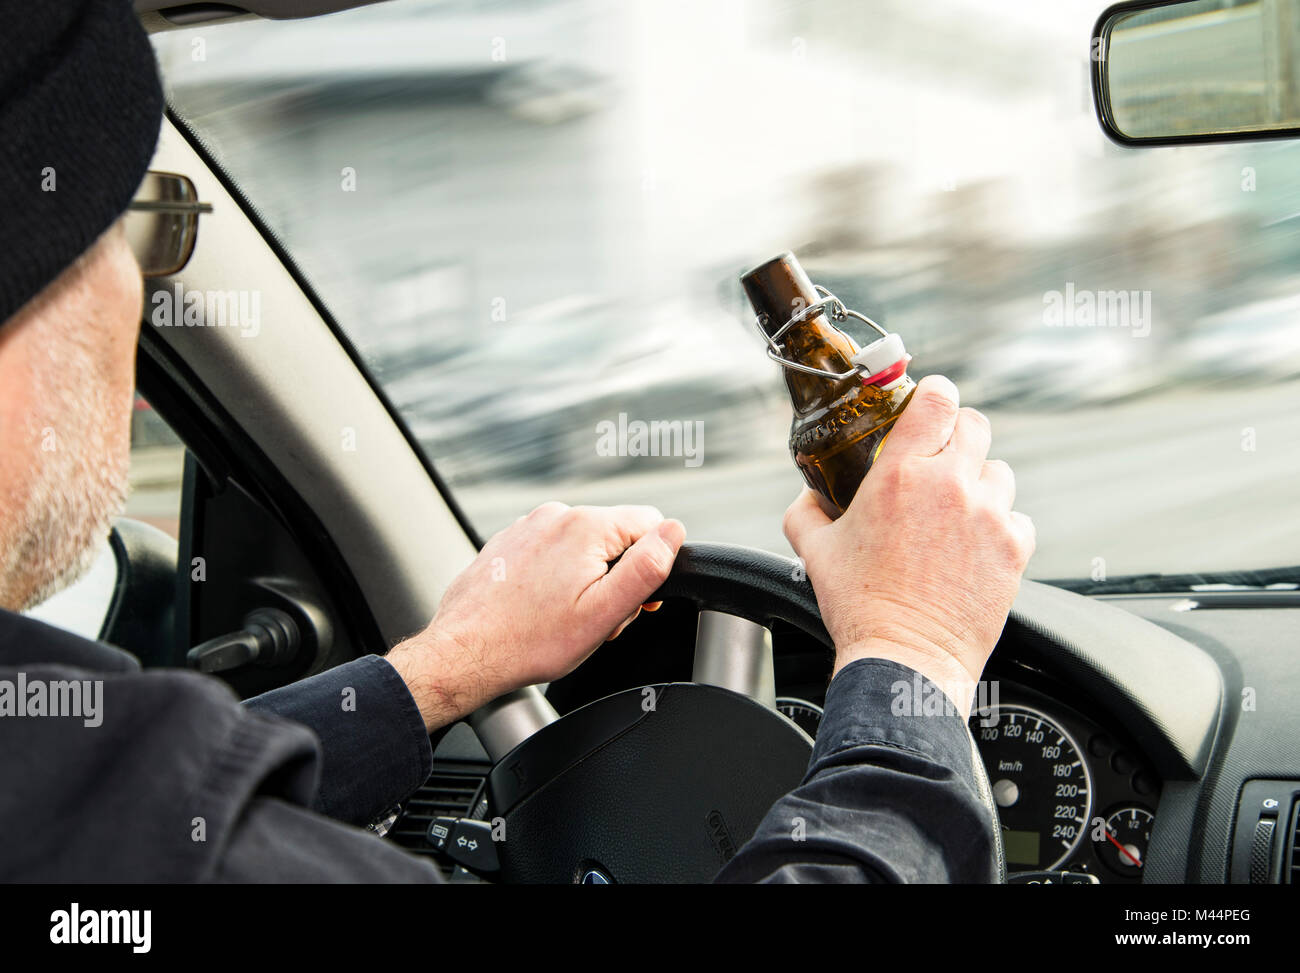 Man holds an opened bottle of beer in one hand and covers the steering wheel of a car with the other. Stock Photo